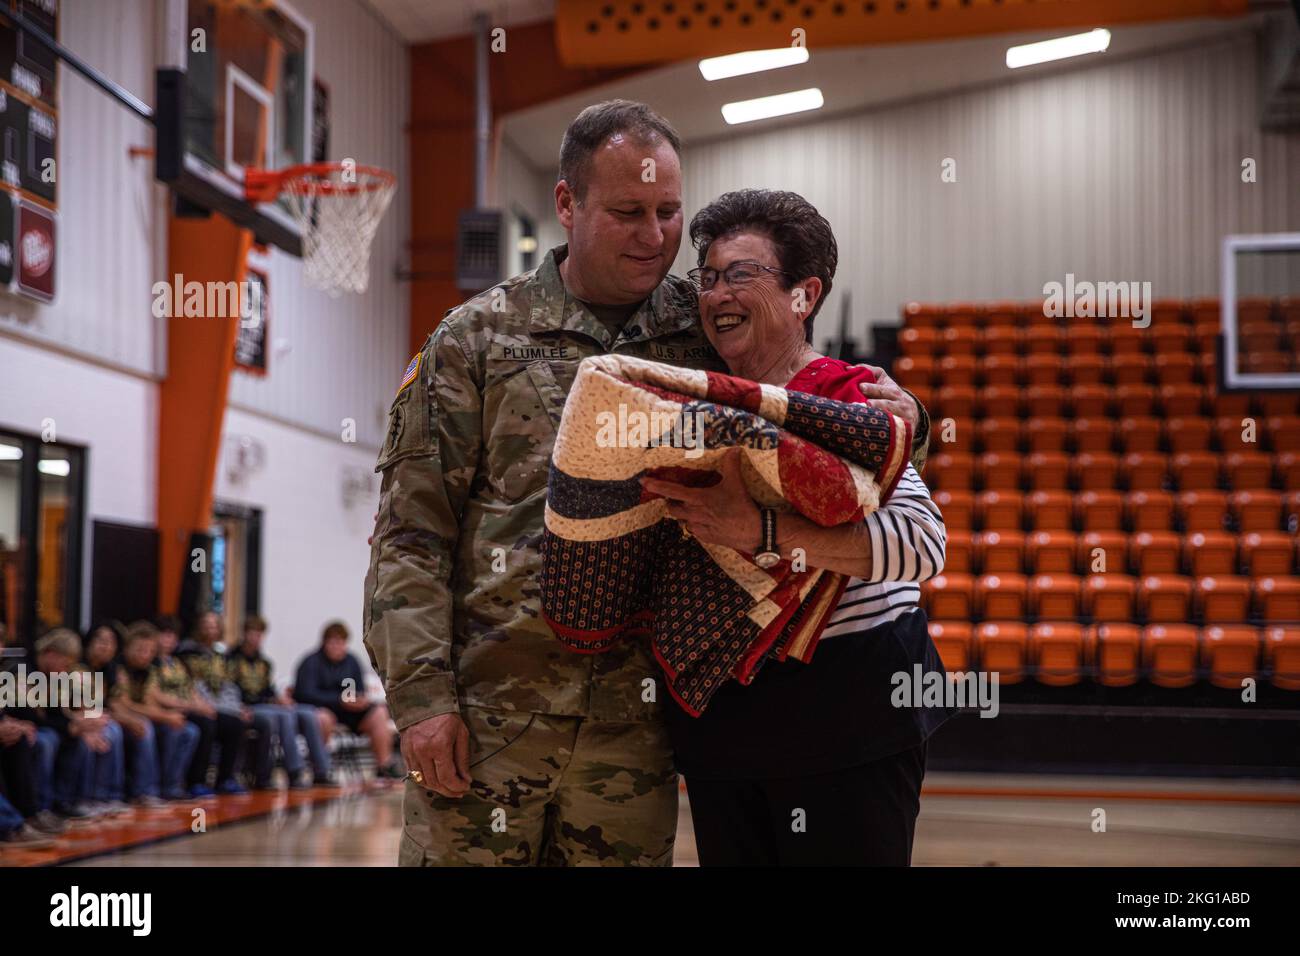 Master Sgt. Earl Plumlee, Medal of Honor recipient, receives a blanket from his former teacher at Merritt High School in Merritt, Oklahoma, Oct. 21, 2022. Plumlee, a native Oklahoman, toured his home state Oct. 18-22. During his visit, Plumlee spoke at a Merritt High School football pep rally about his experiences being a Medal of Honor recipient and what it meant to be back home. (Oklahoma National Guard photo by Sgt. Reece Heck) Stock Photo